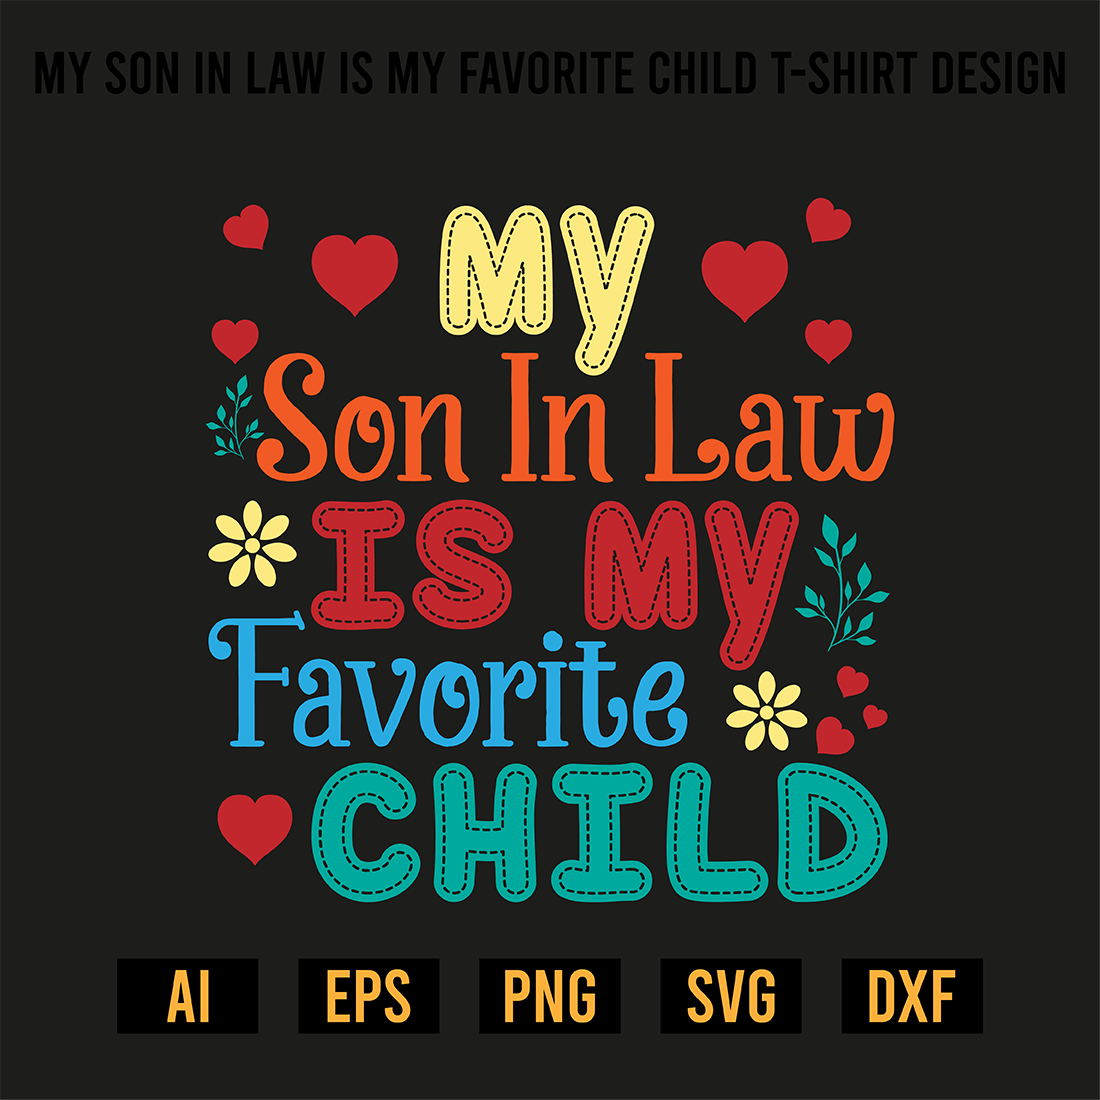 My Son In Law Is My Favorite Child T-Shirt Design preview image.